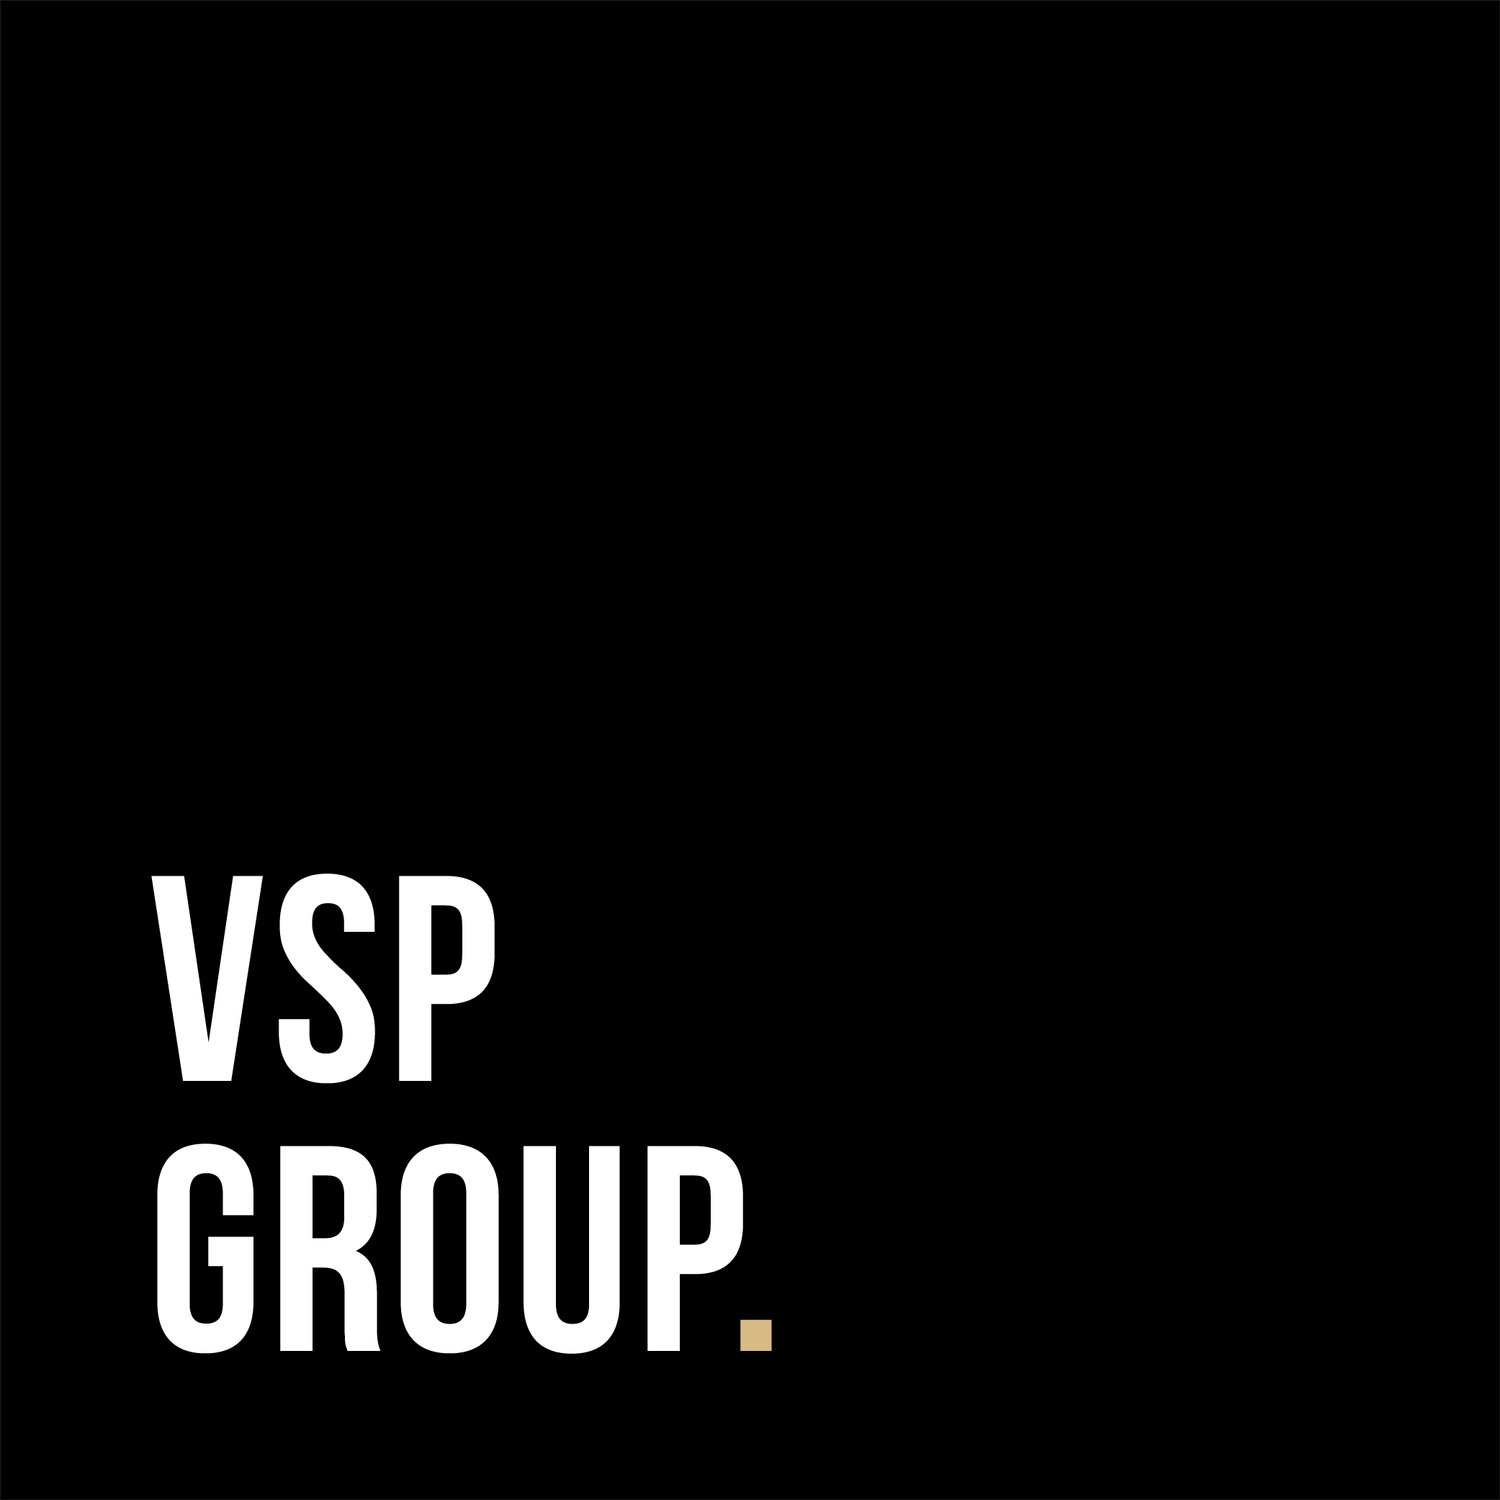 The VSP Group